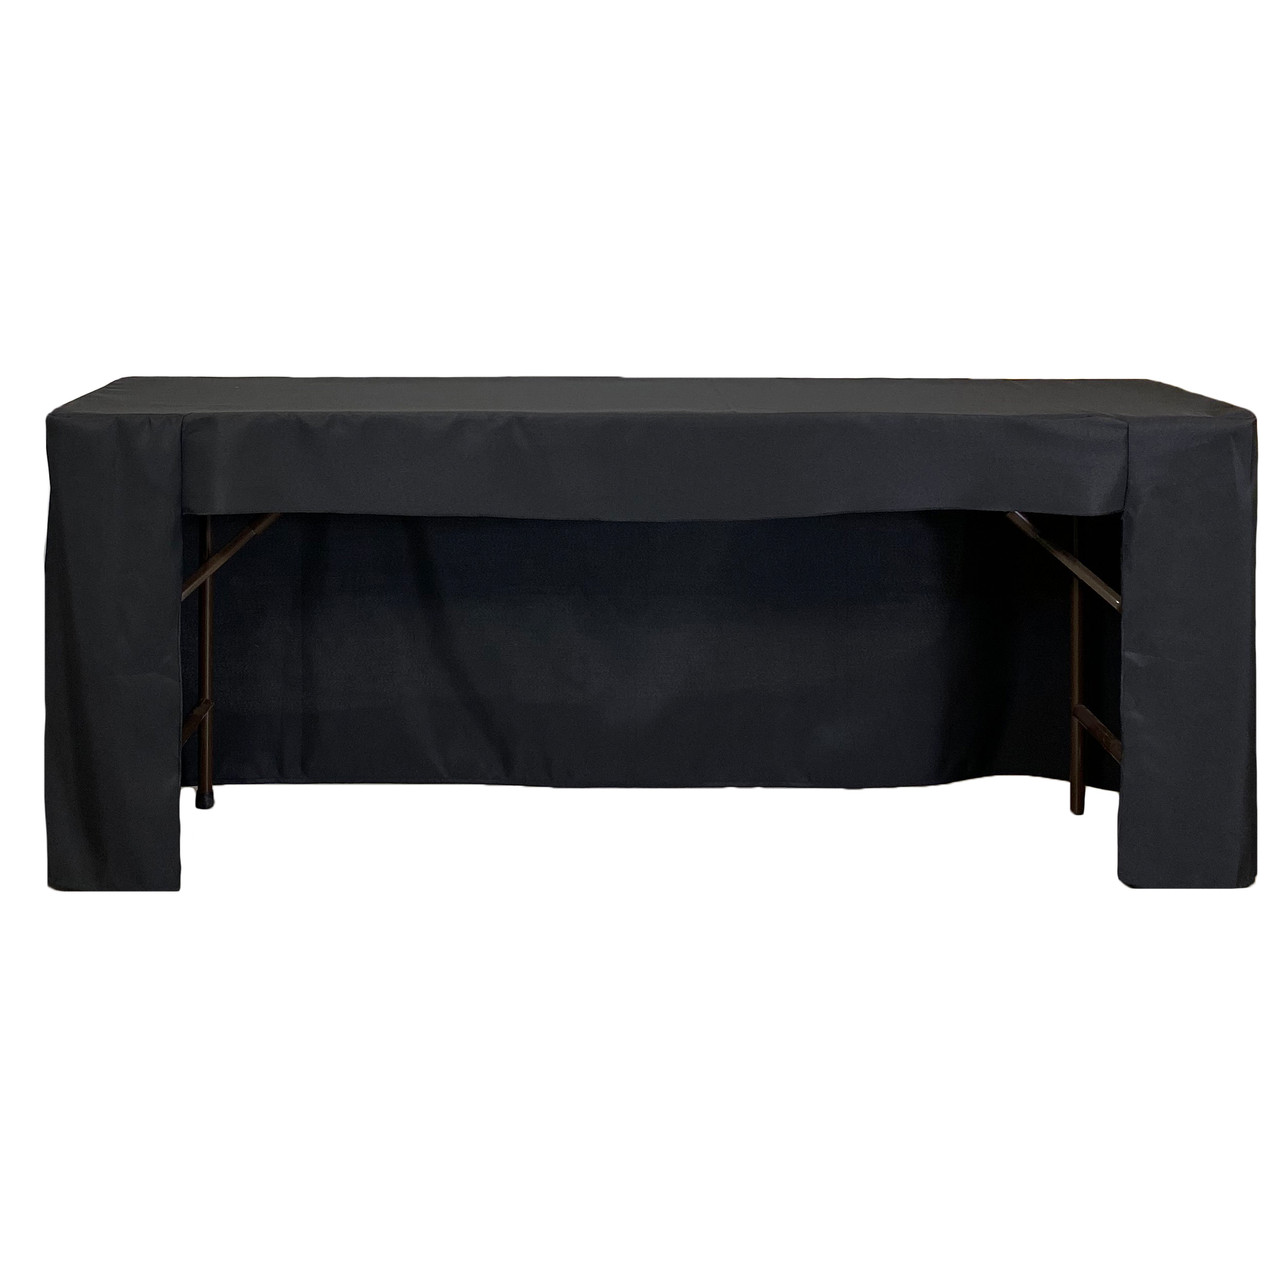 https://cdn11.bigcommerce.com/s-bch7e9/images/stencil/1280x1280/products/2308/15751/6ftx18-polyester-fitted-tablecloths-black__24426.1670355473.jpg?c=2